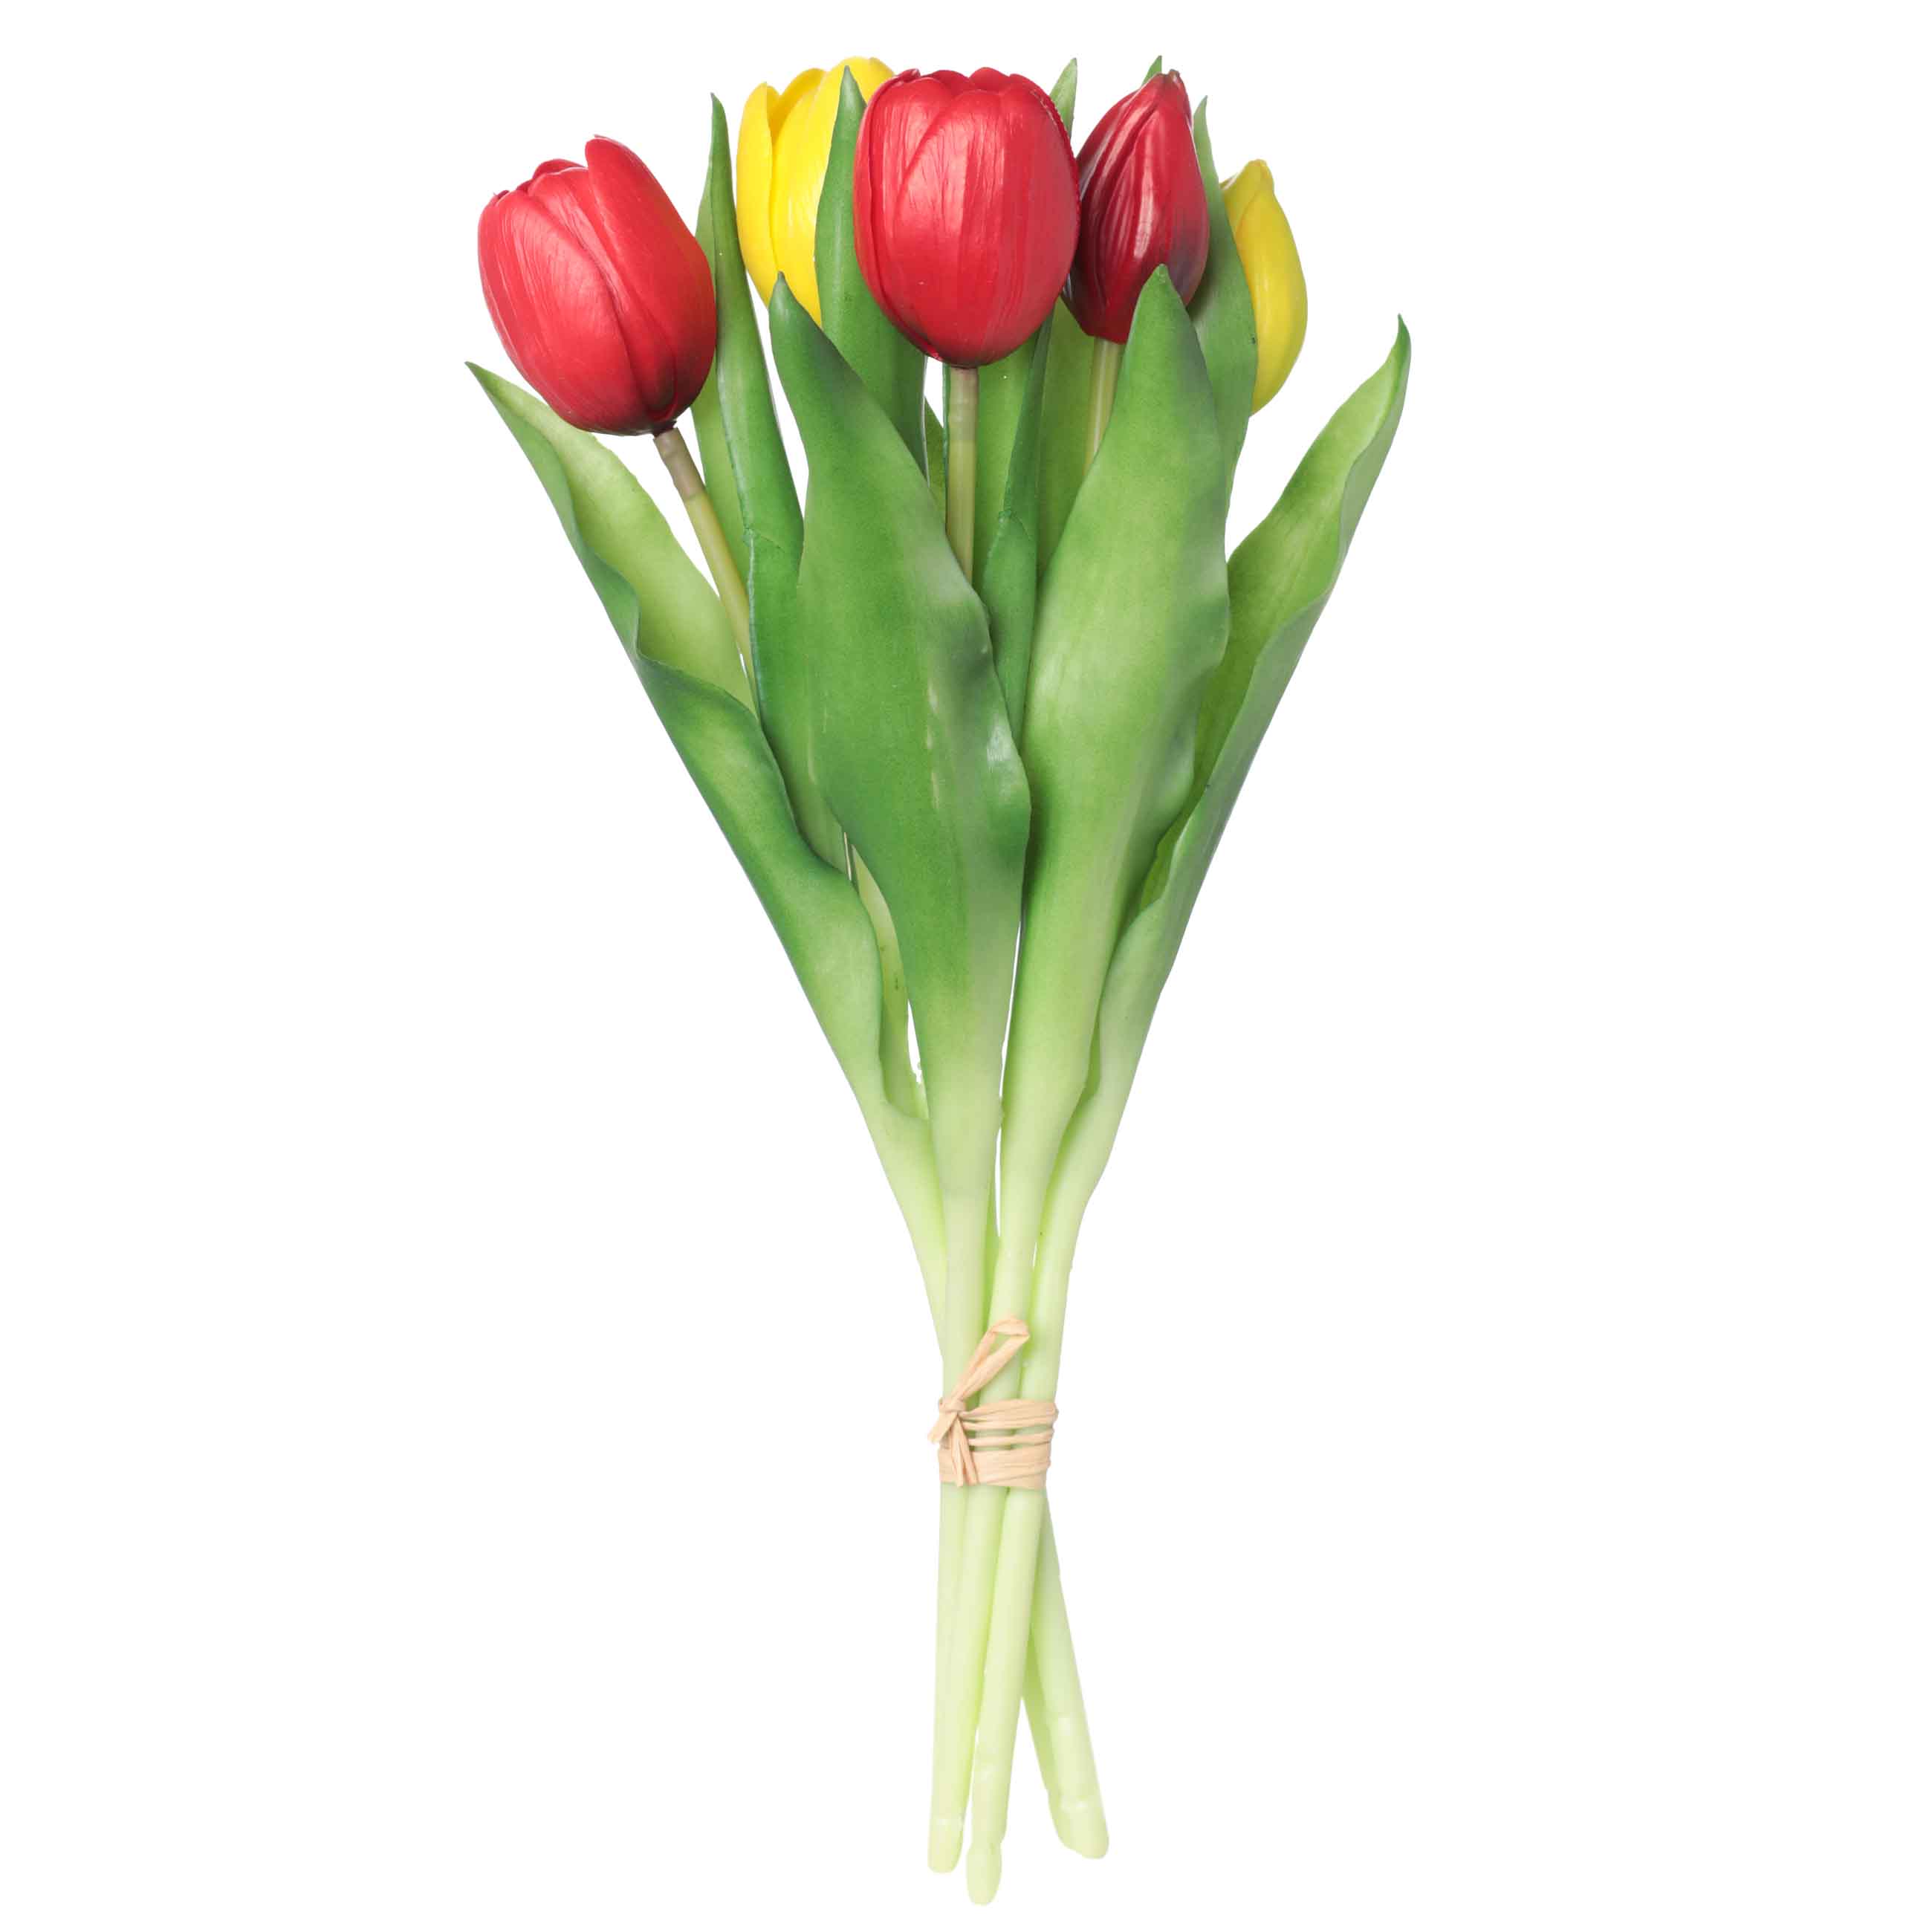 Decorative bouquet, 29 cm, packed, TEP / paper, Yellow and red tulips, Tulip garden изображение № 2